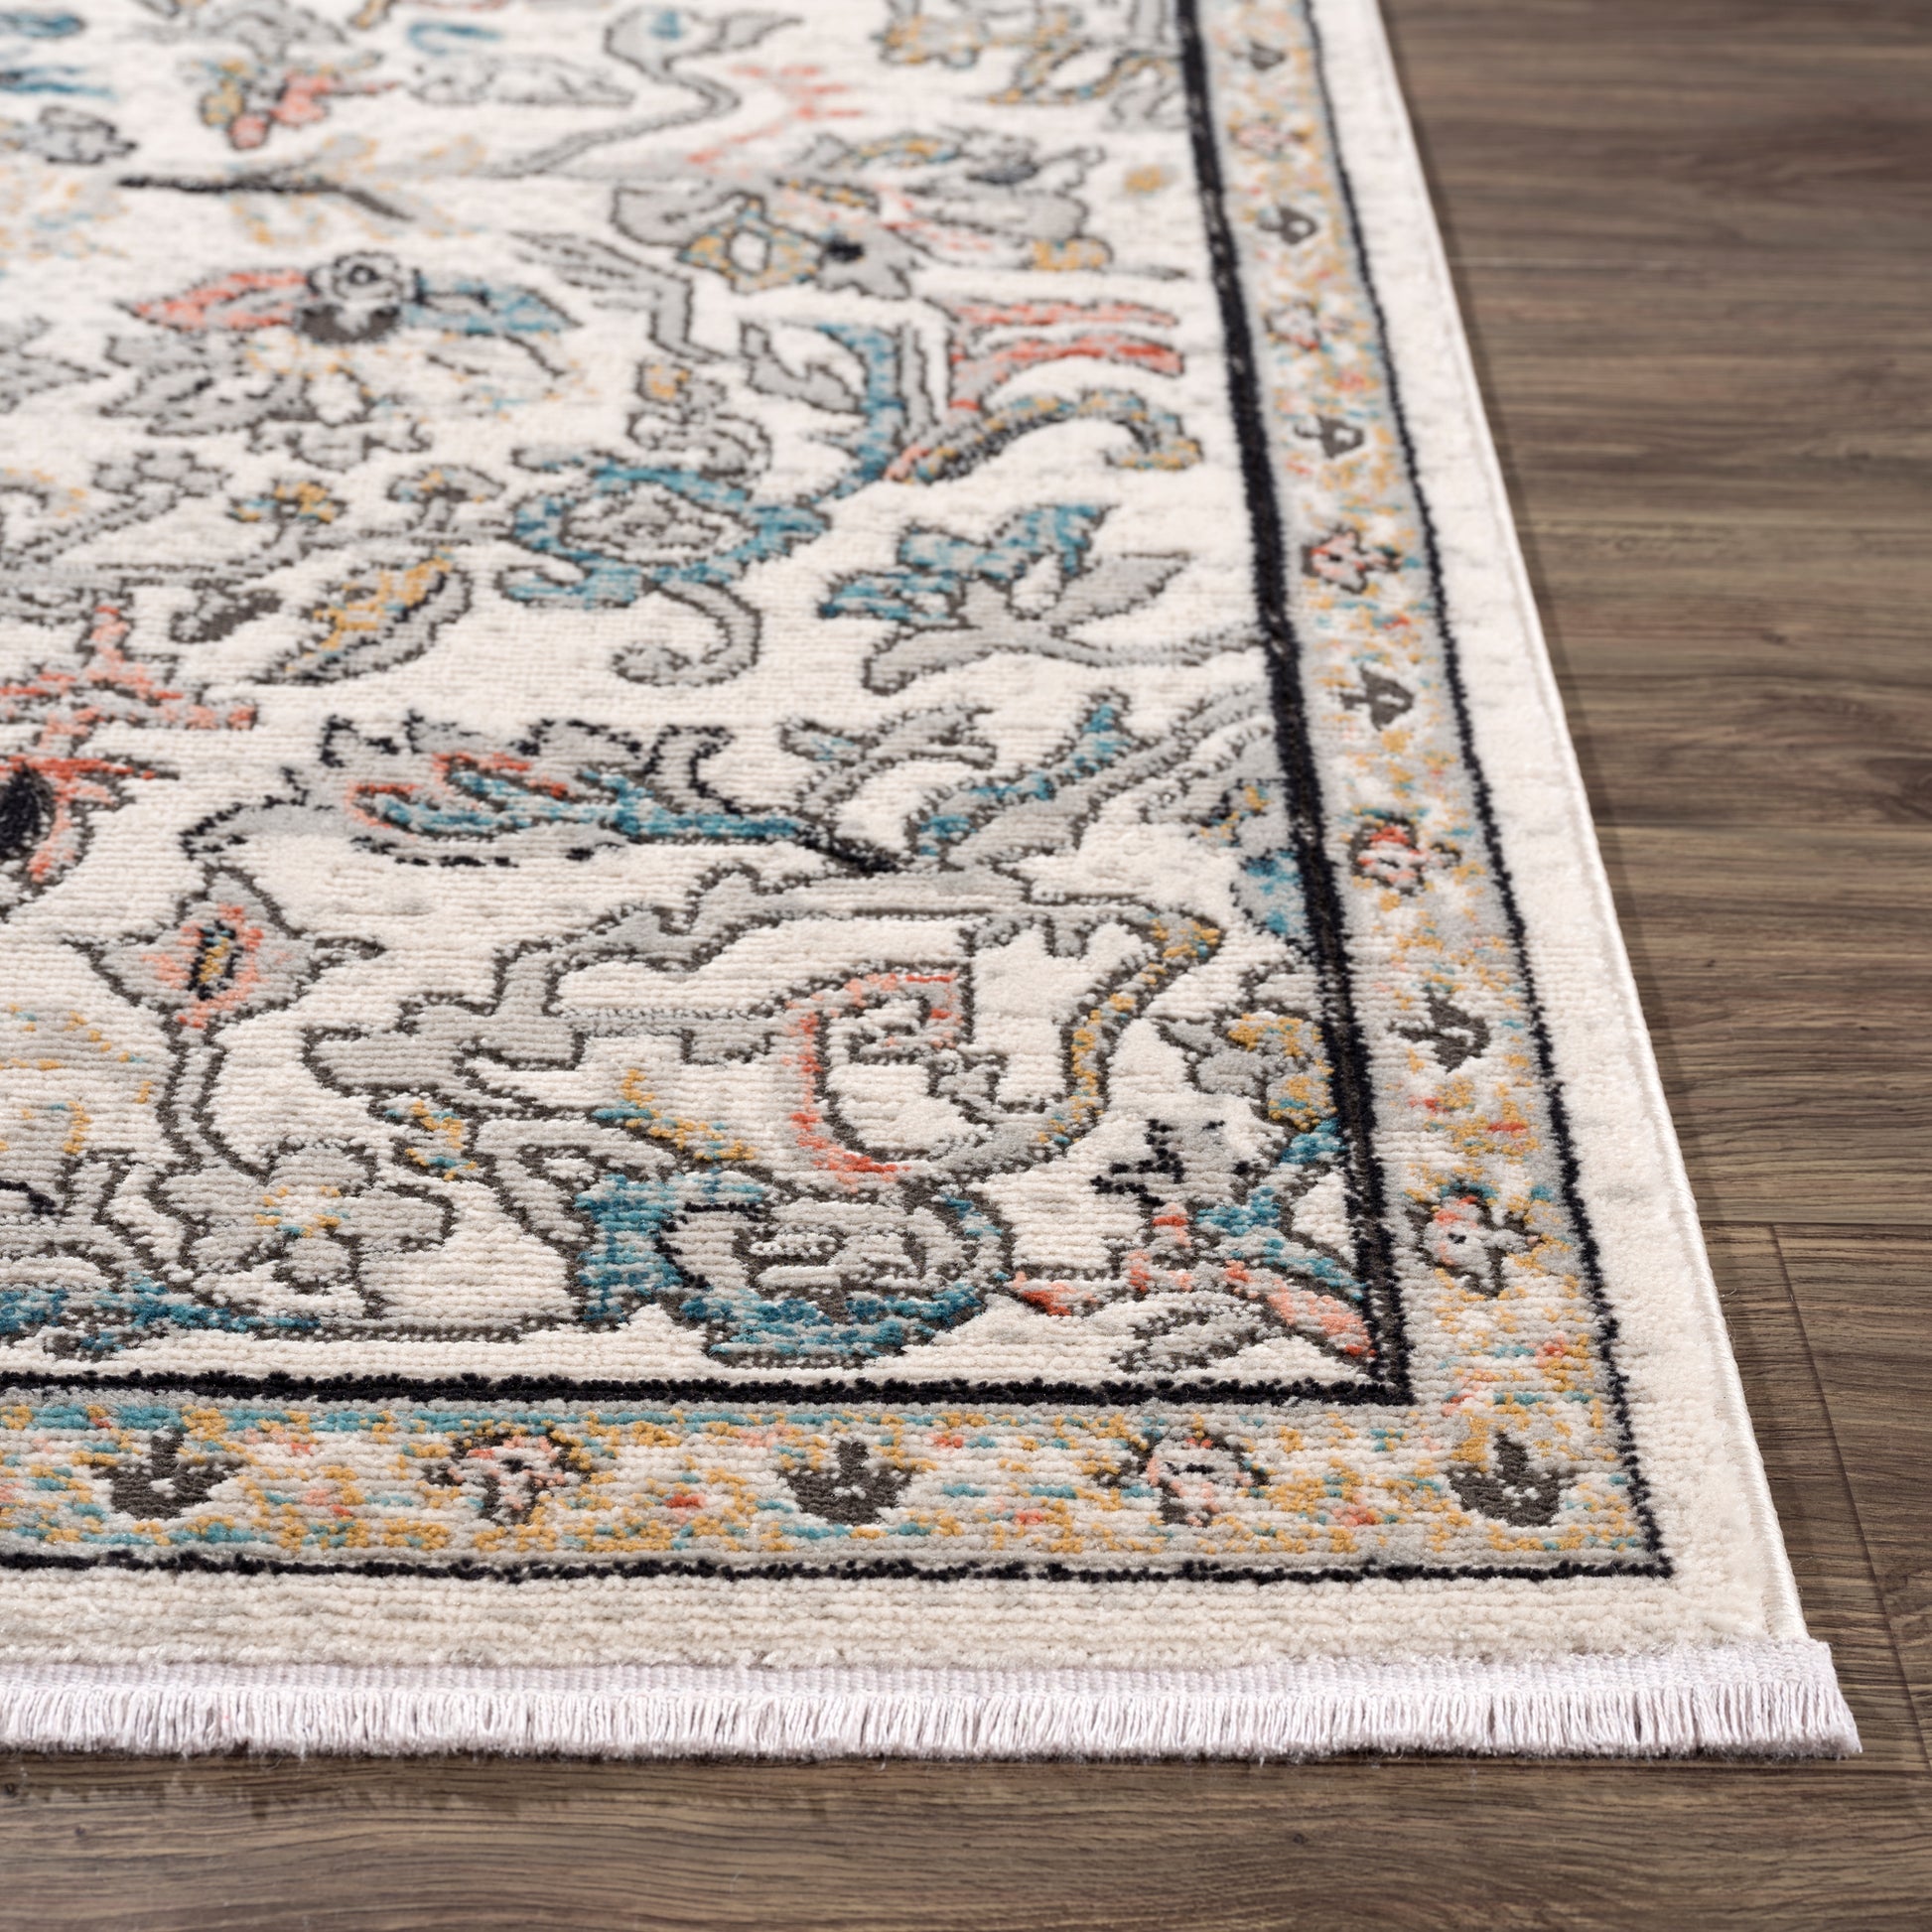 la dole rugs traditional persian oriental paisly ivory grey teal turquoise red orange area rug 5x7, 5x8 ft Contemporary, Living Room Carpet, Bedroom, Home Office